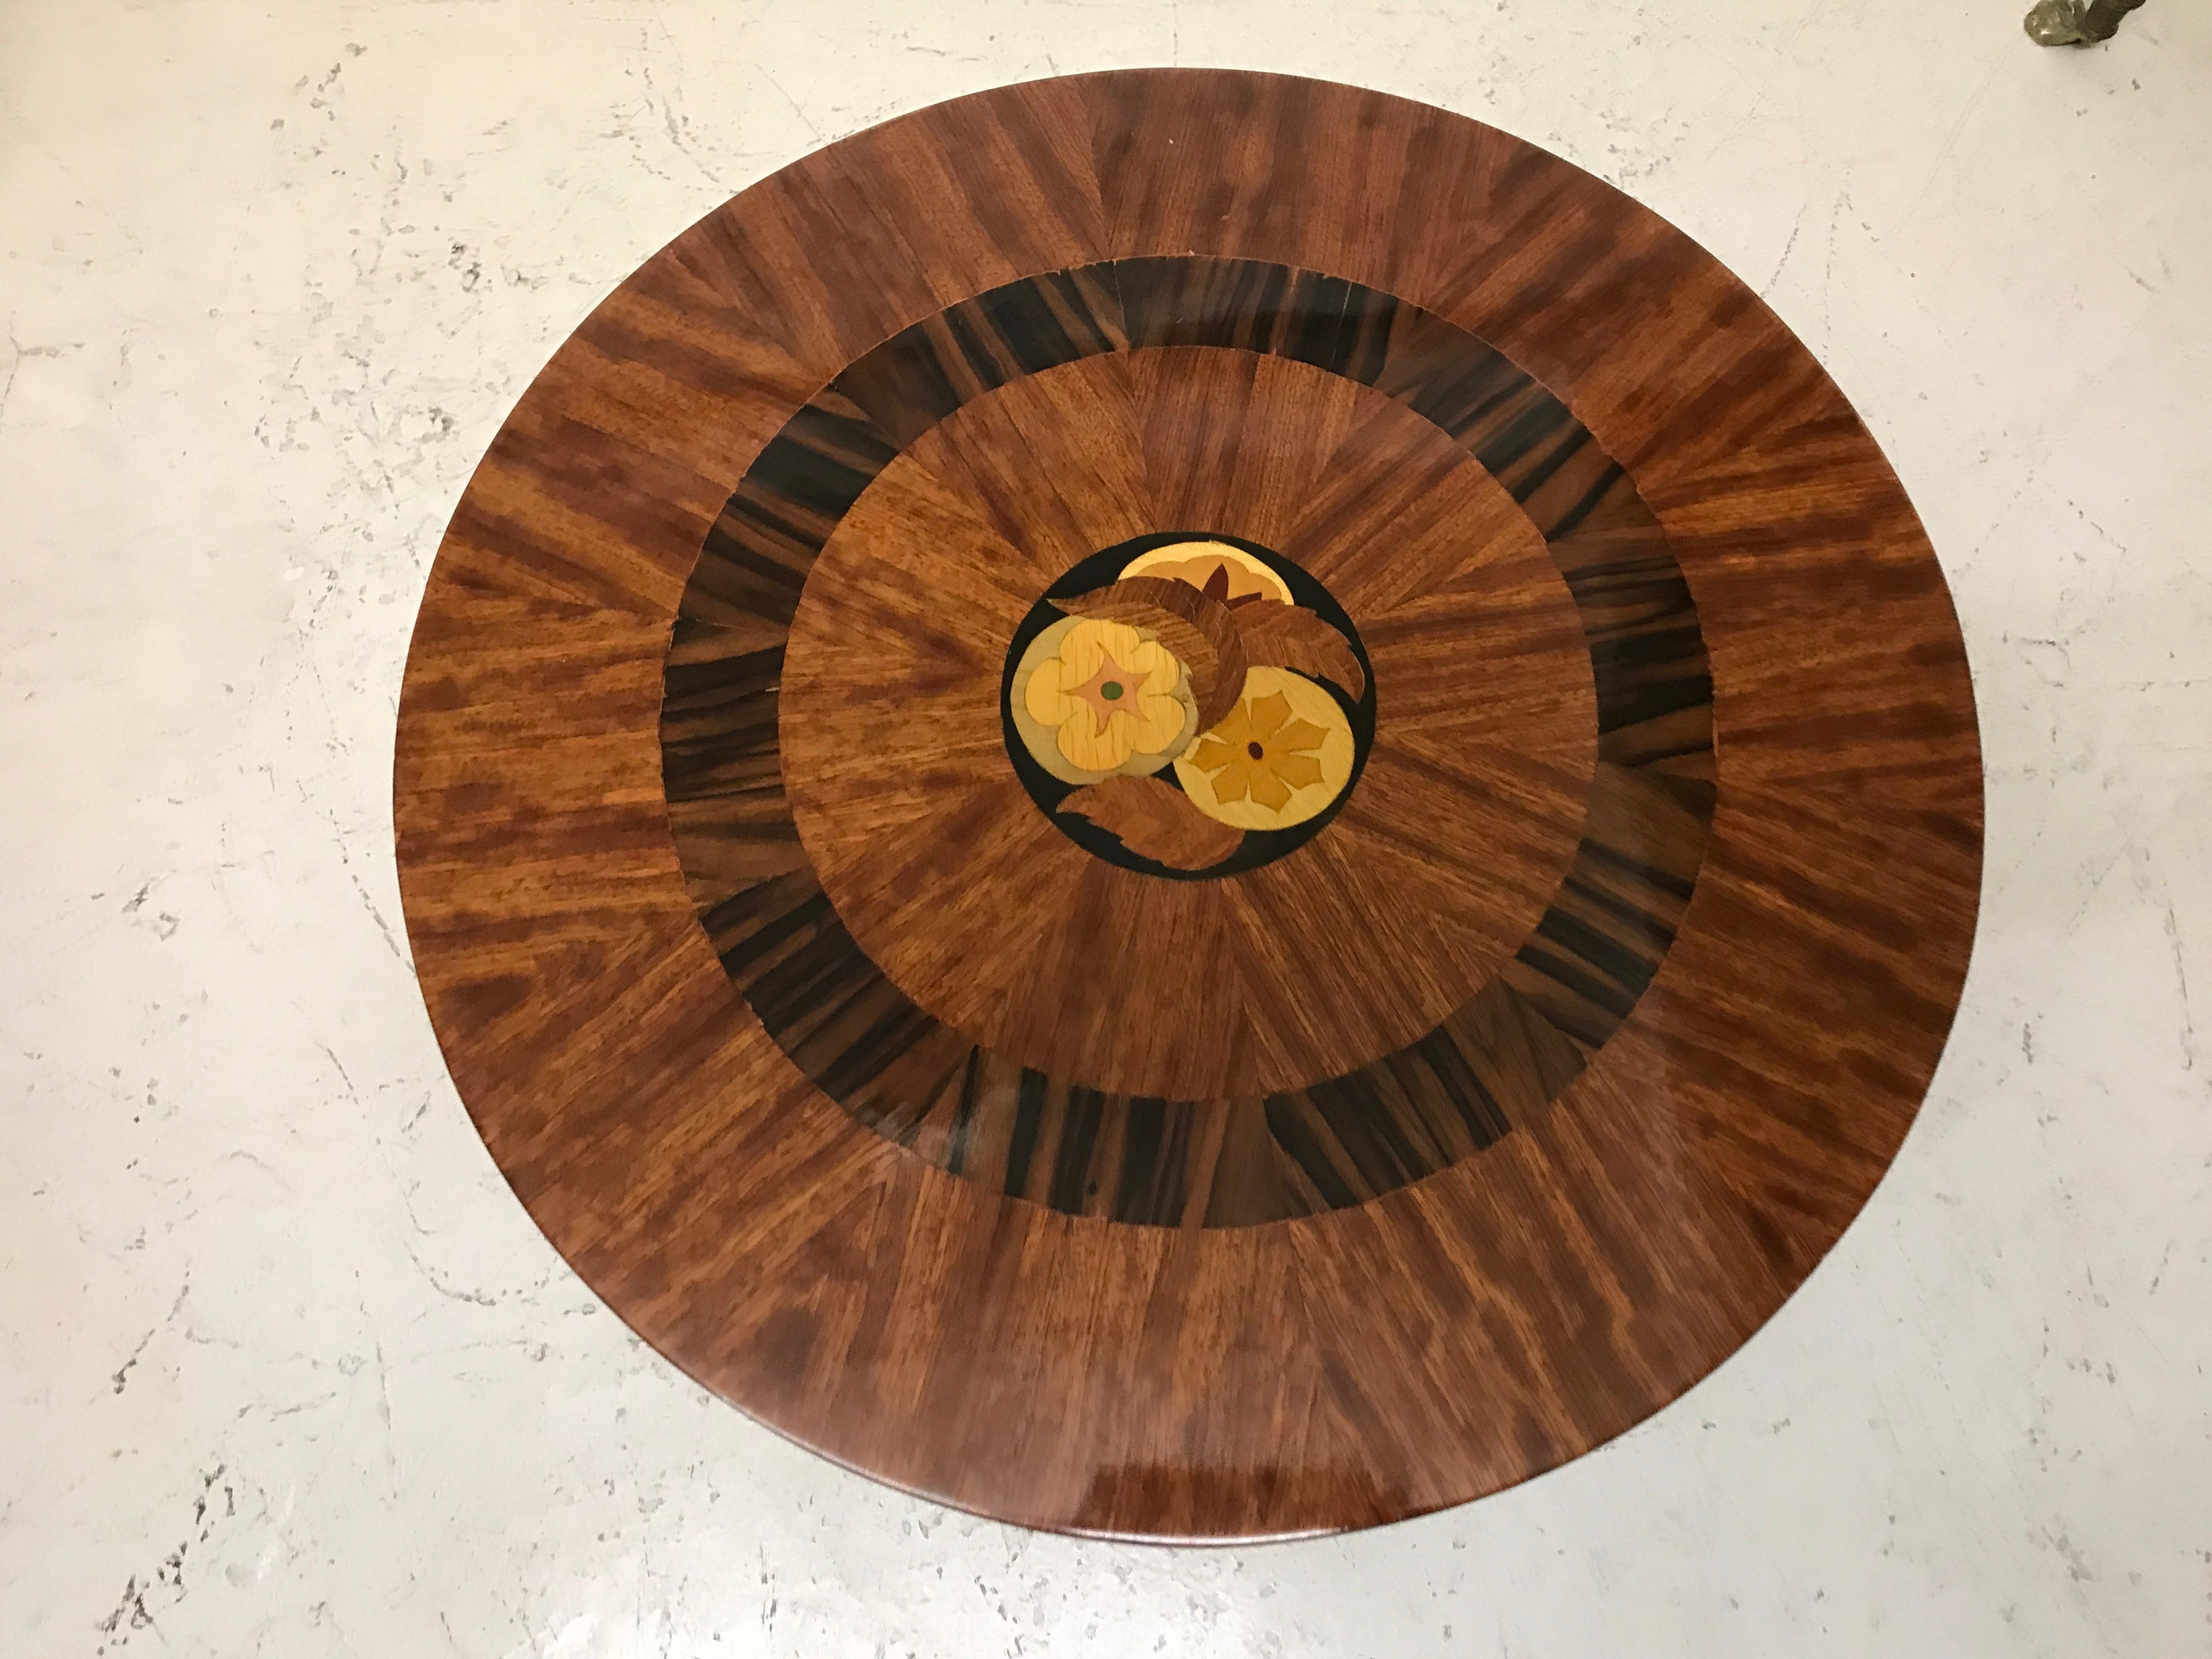 Table in marquetry

Material: Wood
Style: Art Deco
France
We have specialized in the sale of Art Deco and Art Nouveau and Vintage styles since 1982. If you have any questions we are at your disposal.
Pushing the button that reads 'View All From